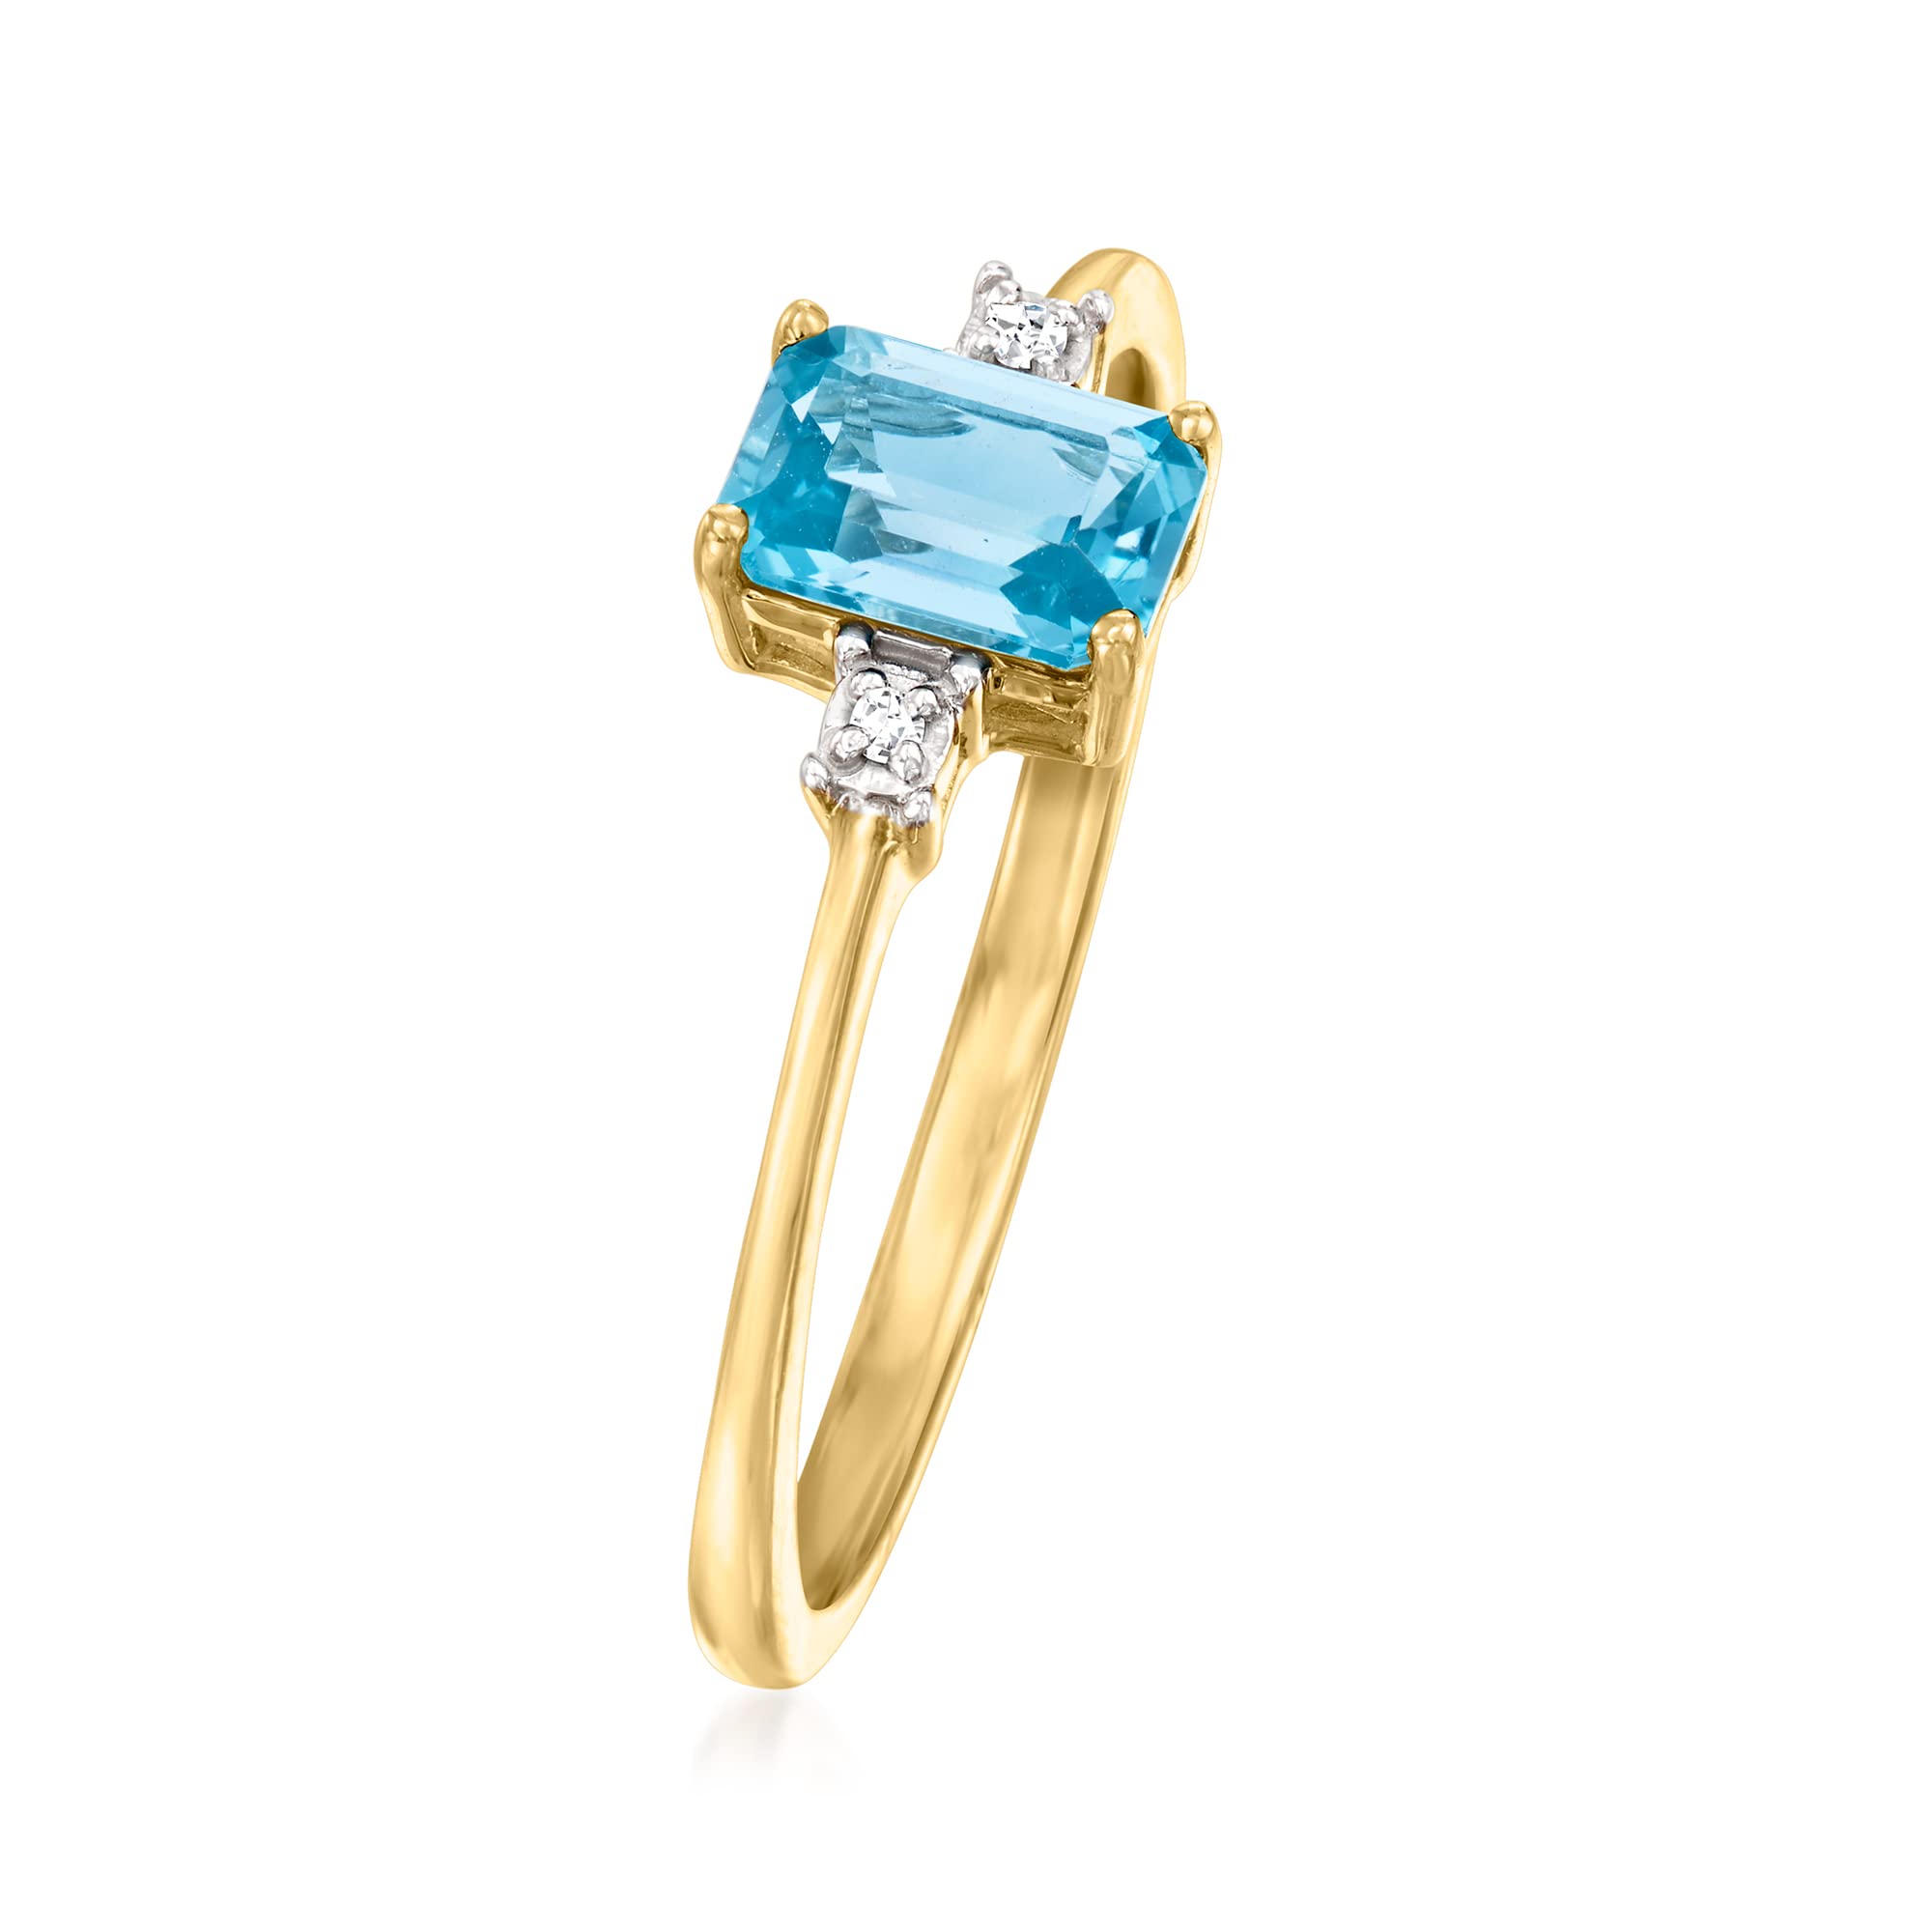 Canaria 0.40 Carat London Blue Topaz Ring With Diamond Accents in 10kt Yellow Gold